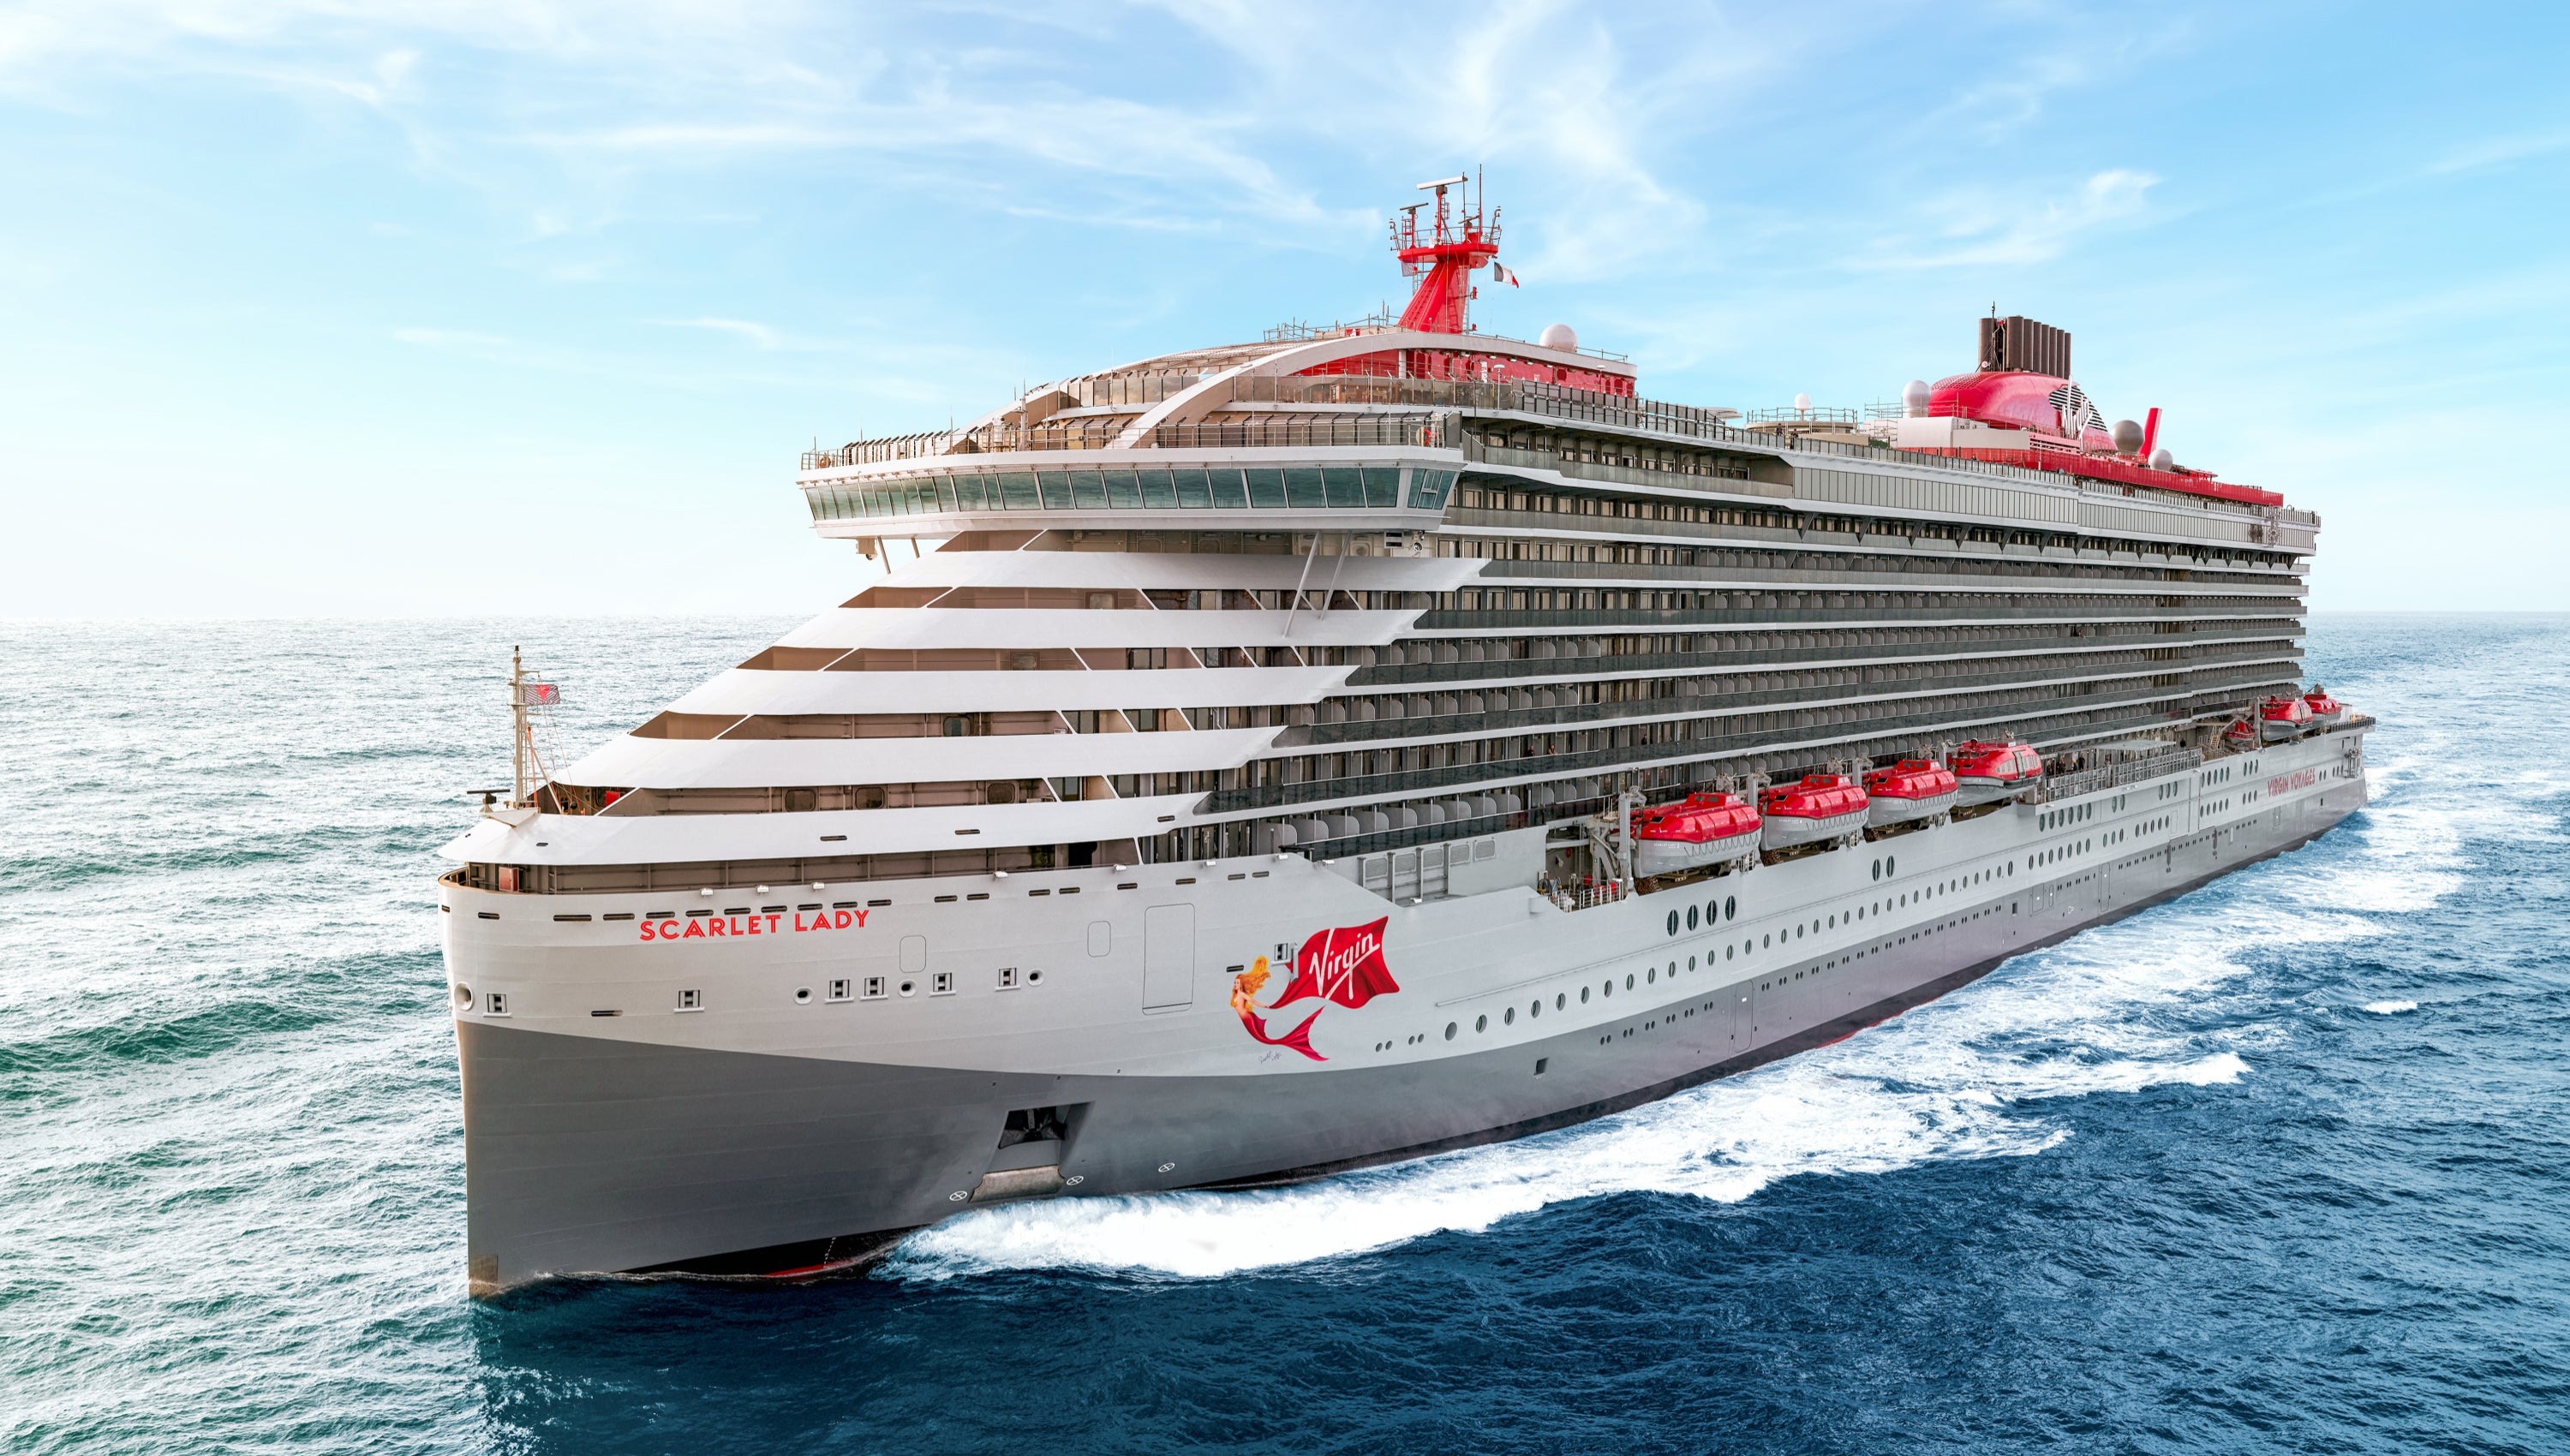 In 2020, Scarlet Lady became the first ship launched by Virgin